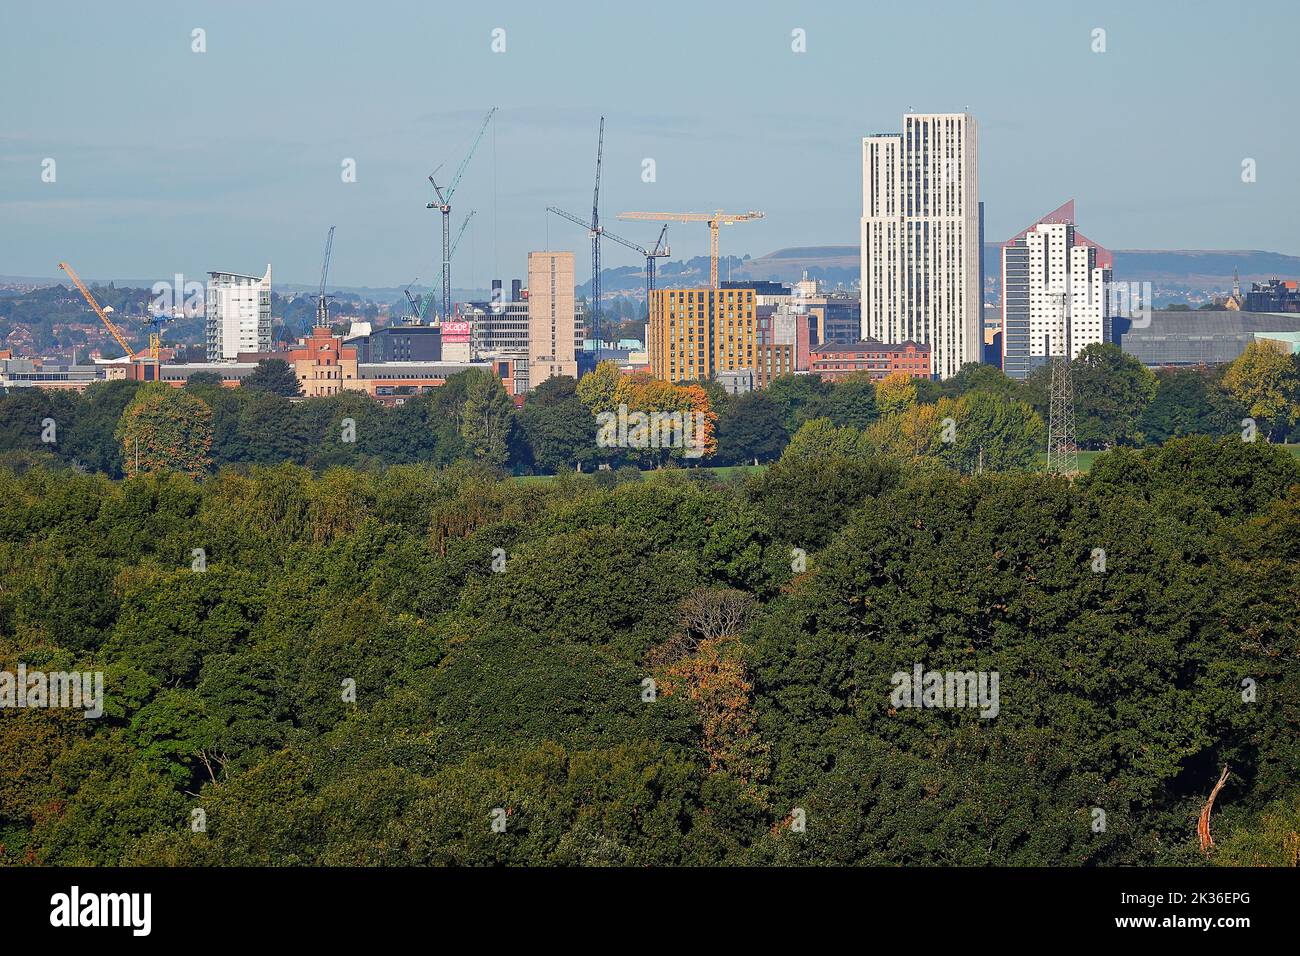 A view of Leeds City skyline with tower cranes on construction sites Stock Photo